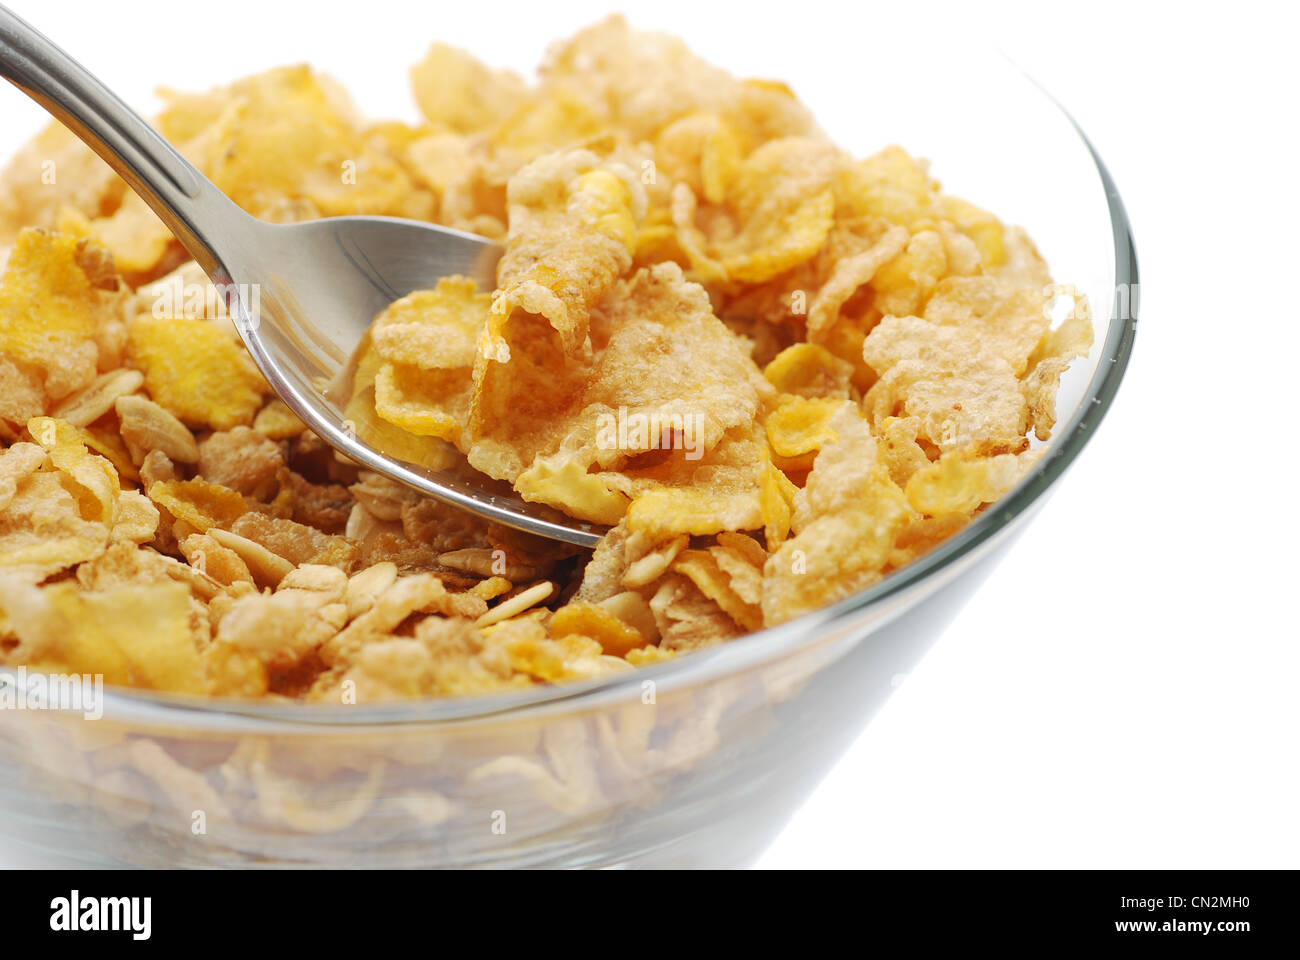 Healthy fiber cereal on white background Stock Photo